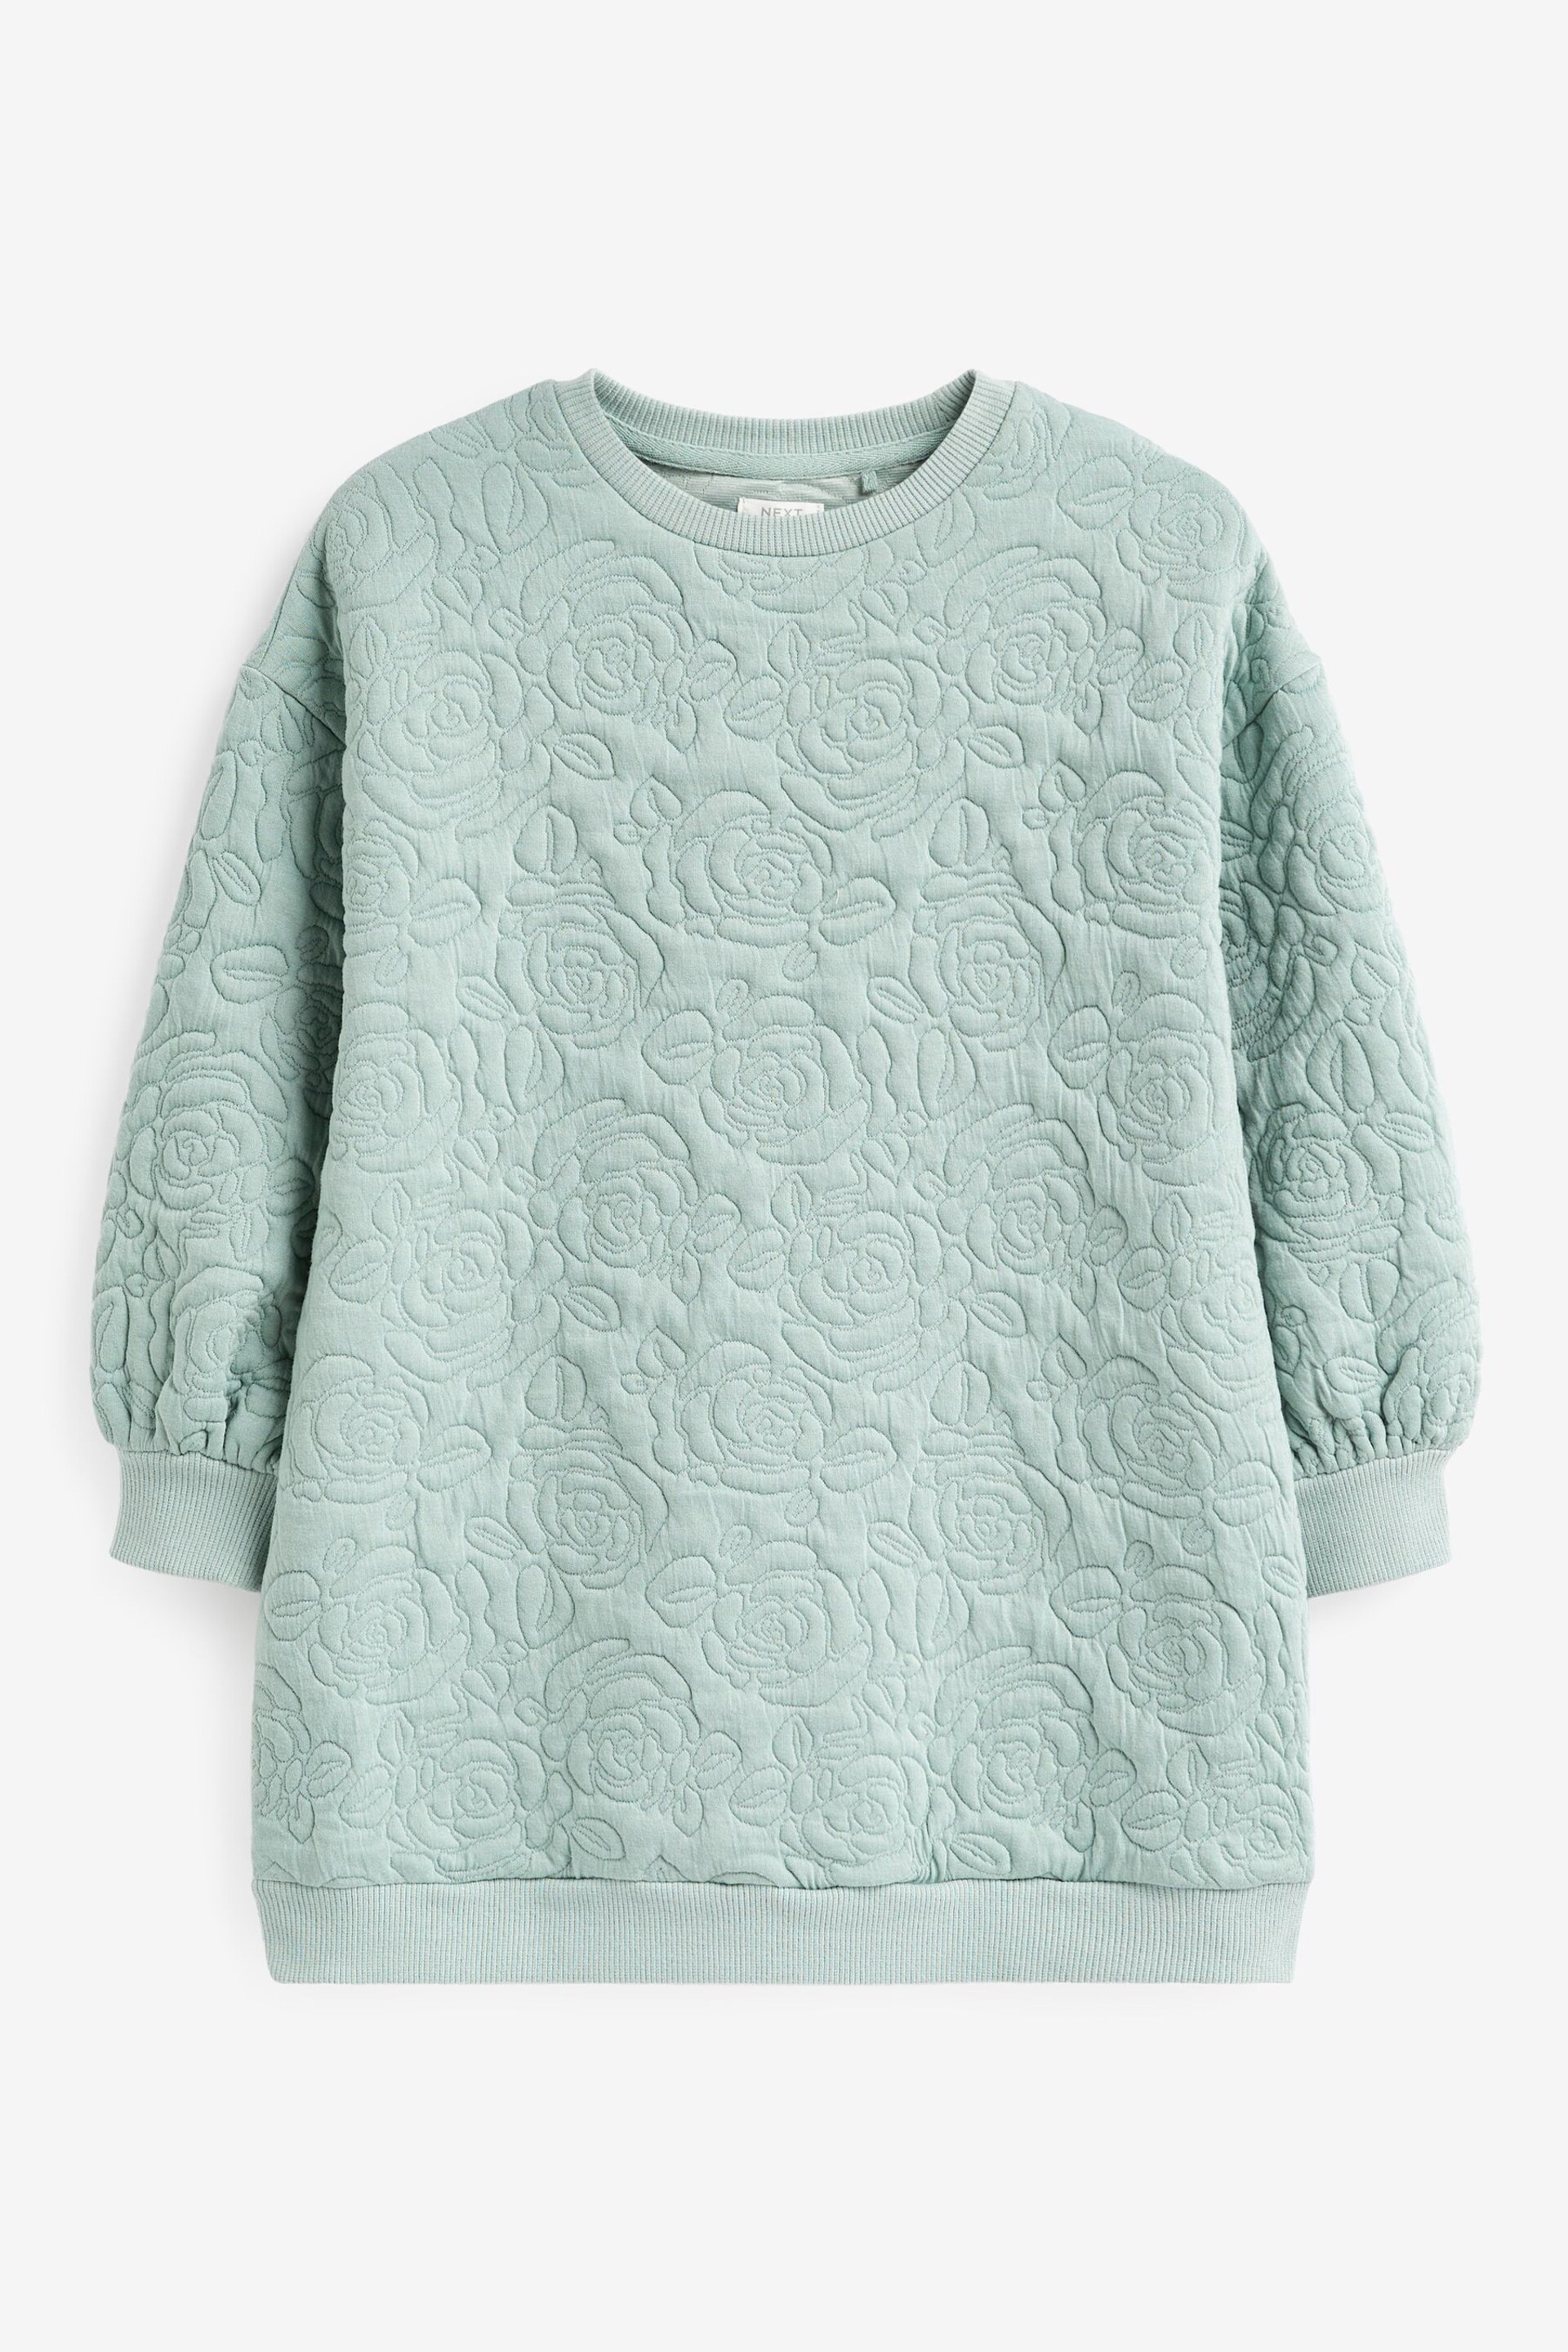 Mint Green/ Blue Floral Quilted Soft Jumper Dress (3-16yrs) - Image 5 of 6